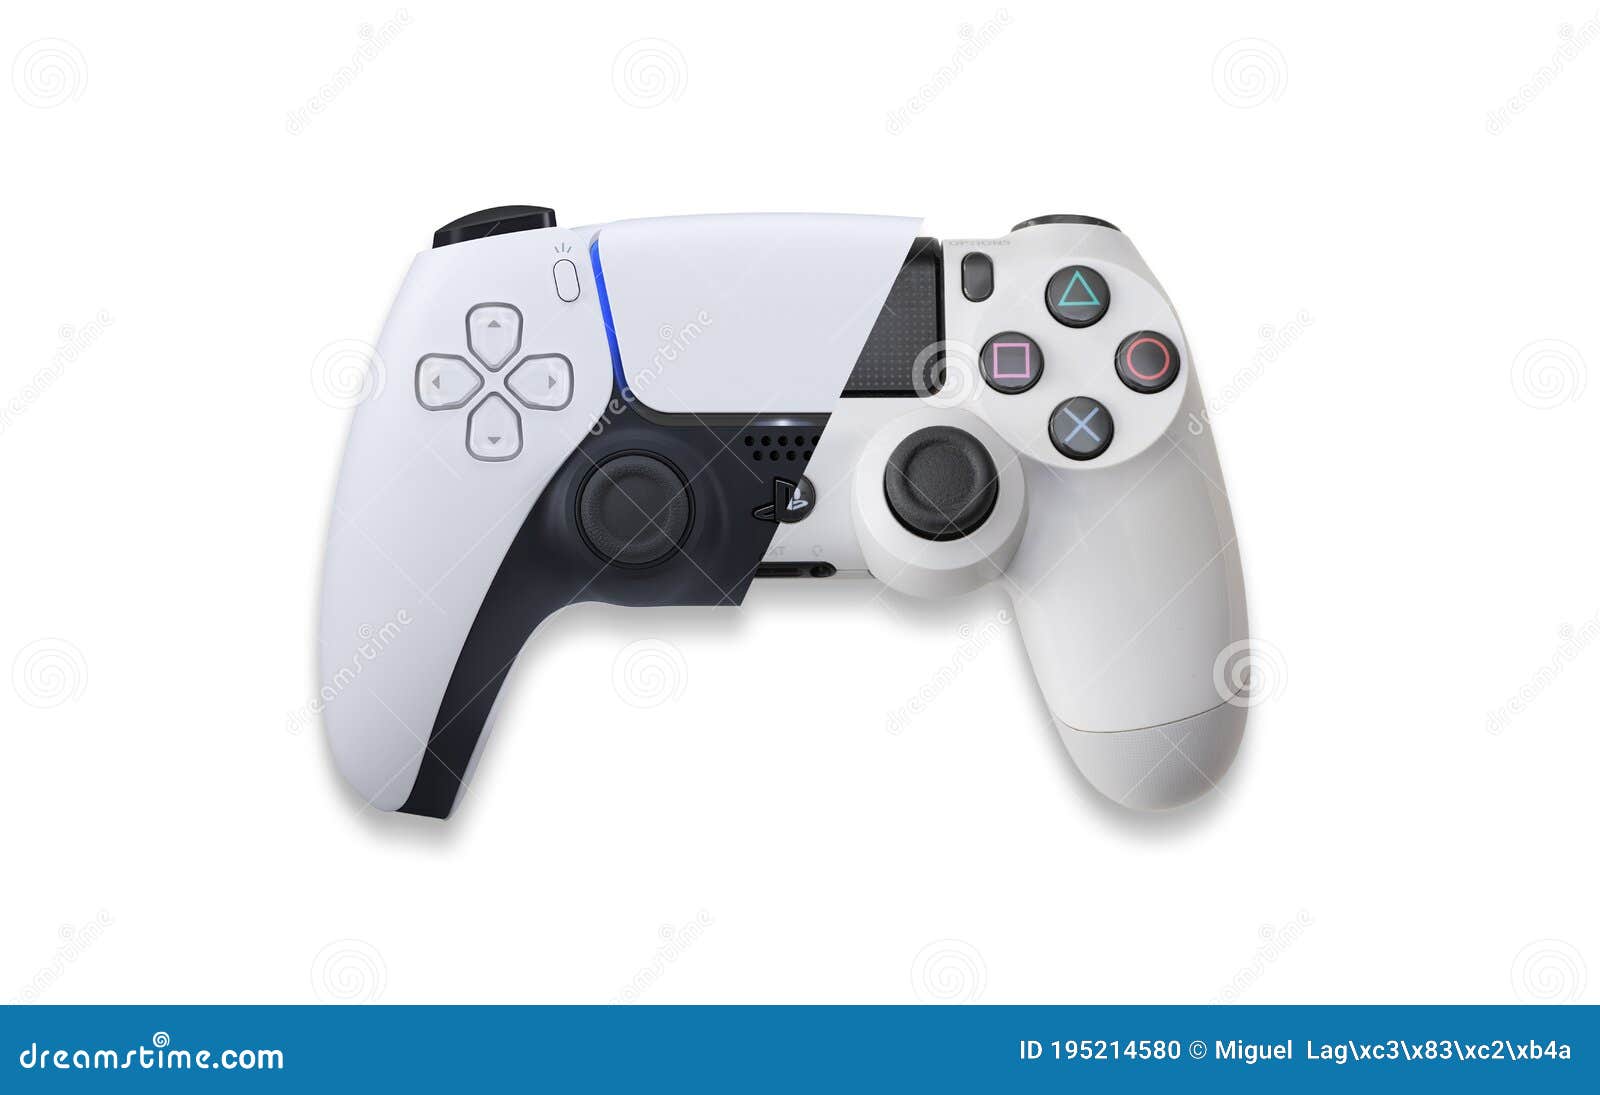 Sao Paulo/SP/Brasil - 03/08/20: Playstation 5 Vs Playstation 4 Controller  Comparision on White Background Editorial Image - Image of playstation5,  controle: 195214580